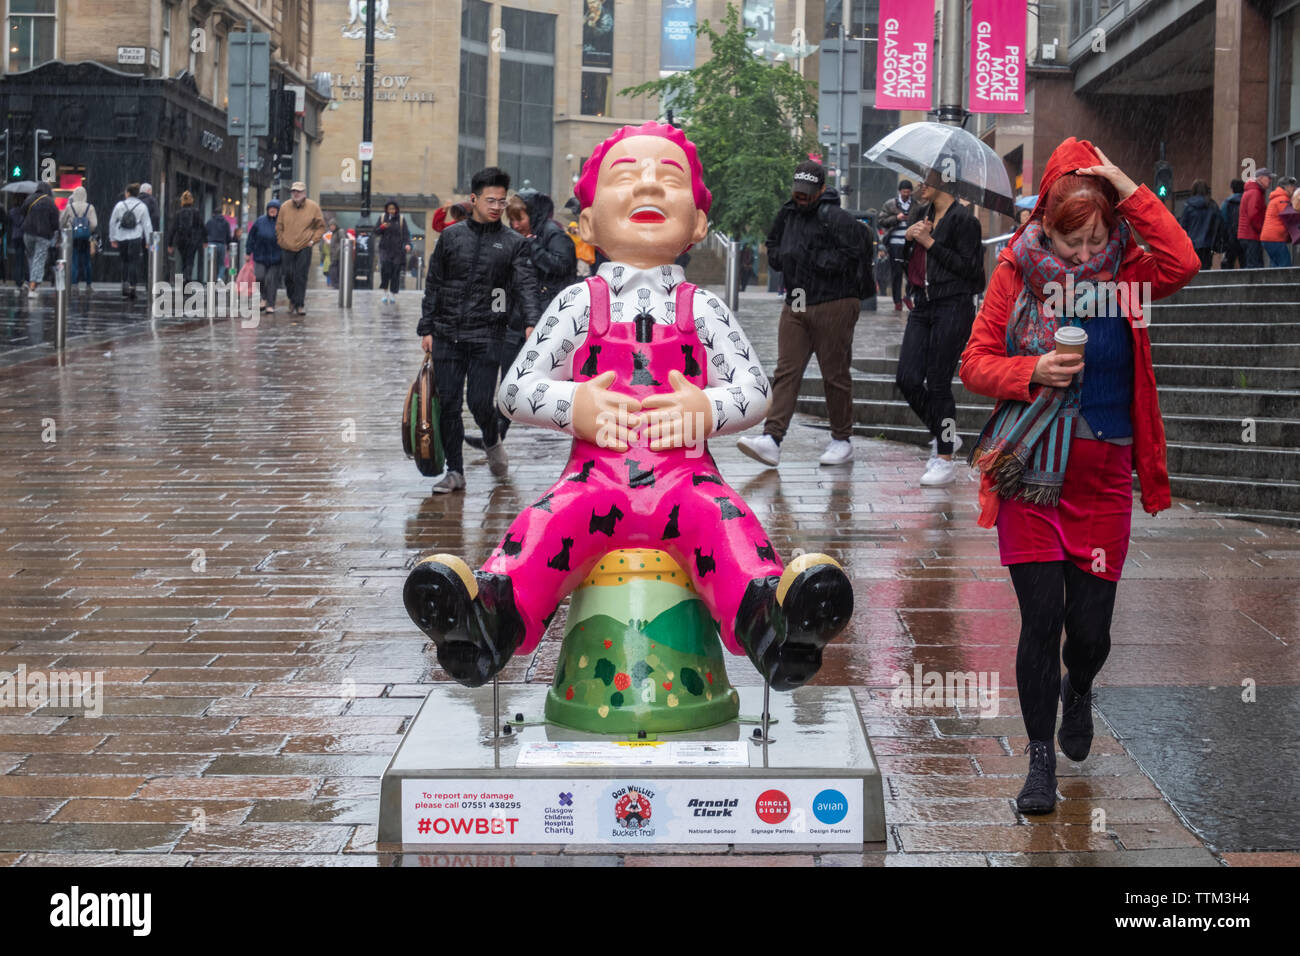 Glasgow, Scotland, UK. 17th June, 2019. Bonnie Oor Wullie, created by Shelley Jayne. This statue sees Oor Wullie adorned with the Symbols of Scotland combined into one colourful and highly decorative design. The sculpture is part of Oor Wullie’s BIG Bucket Trail. Credit: Skully/Alamy Live News Stock Photo